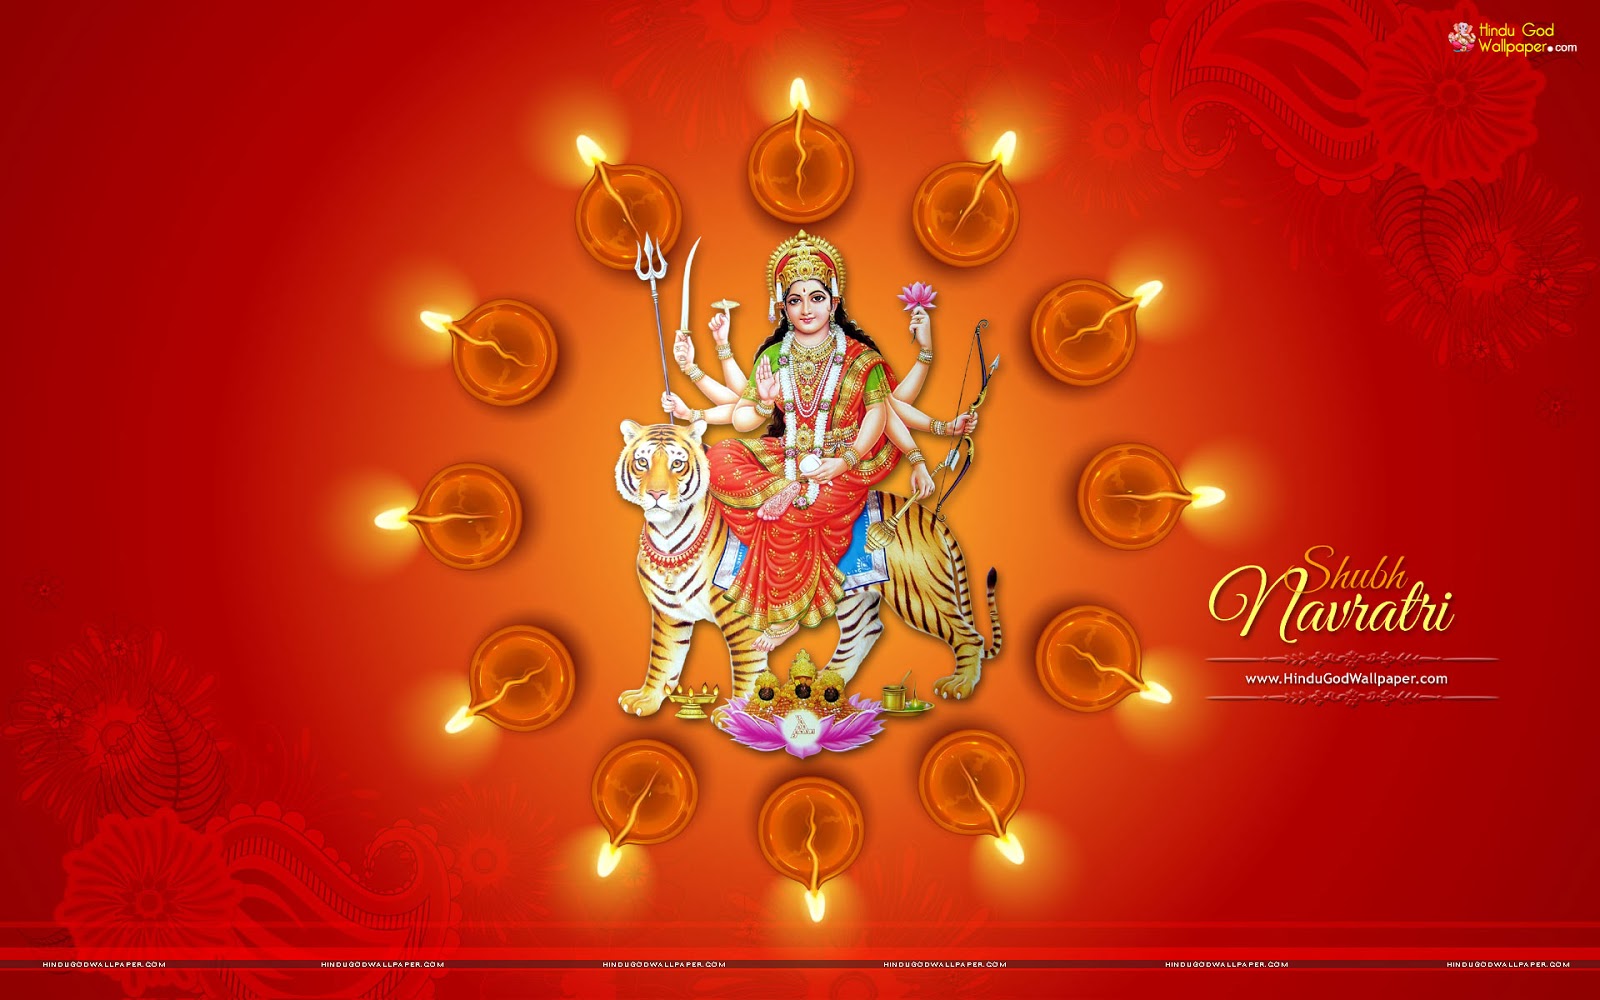 Navratri Wallpaper With Message - Navratri Images With Name - 1600x1000  Wallpaper 